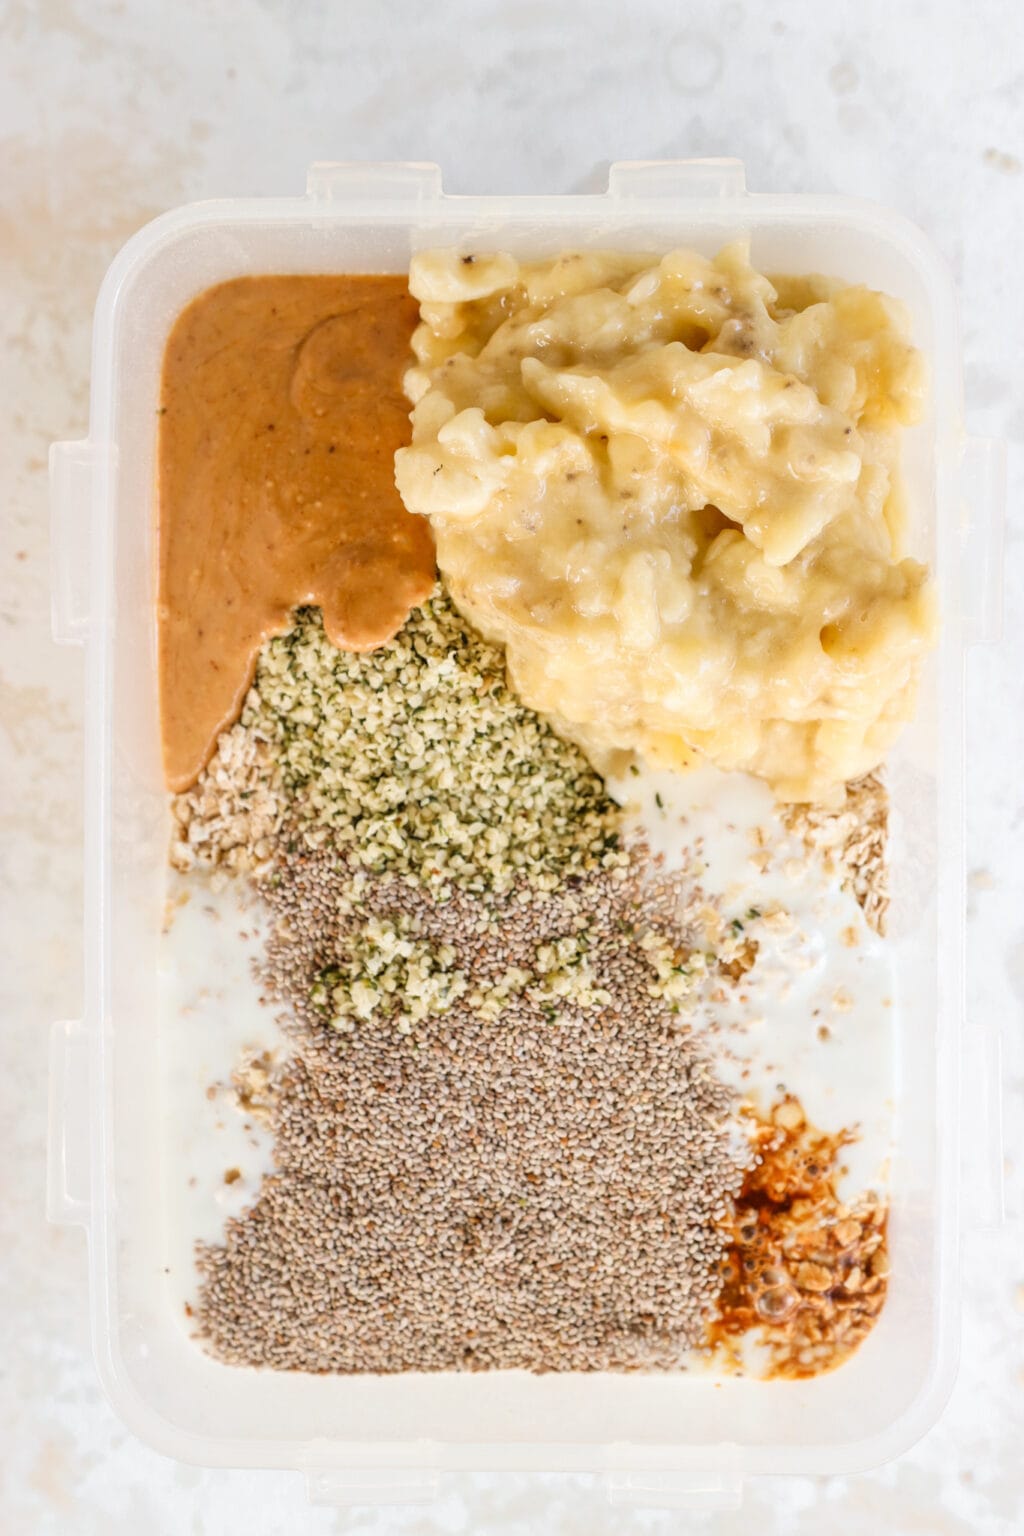 Ingredients for Peanut Butter & Banana Kefir Overnight Oats in a large container, including quick oats, hemp hearts, chia seeds, vanilla extract, plain kefir, maple syrup, peanut butter, and bananas